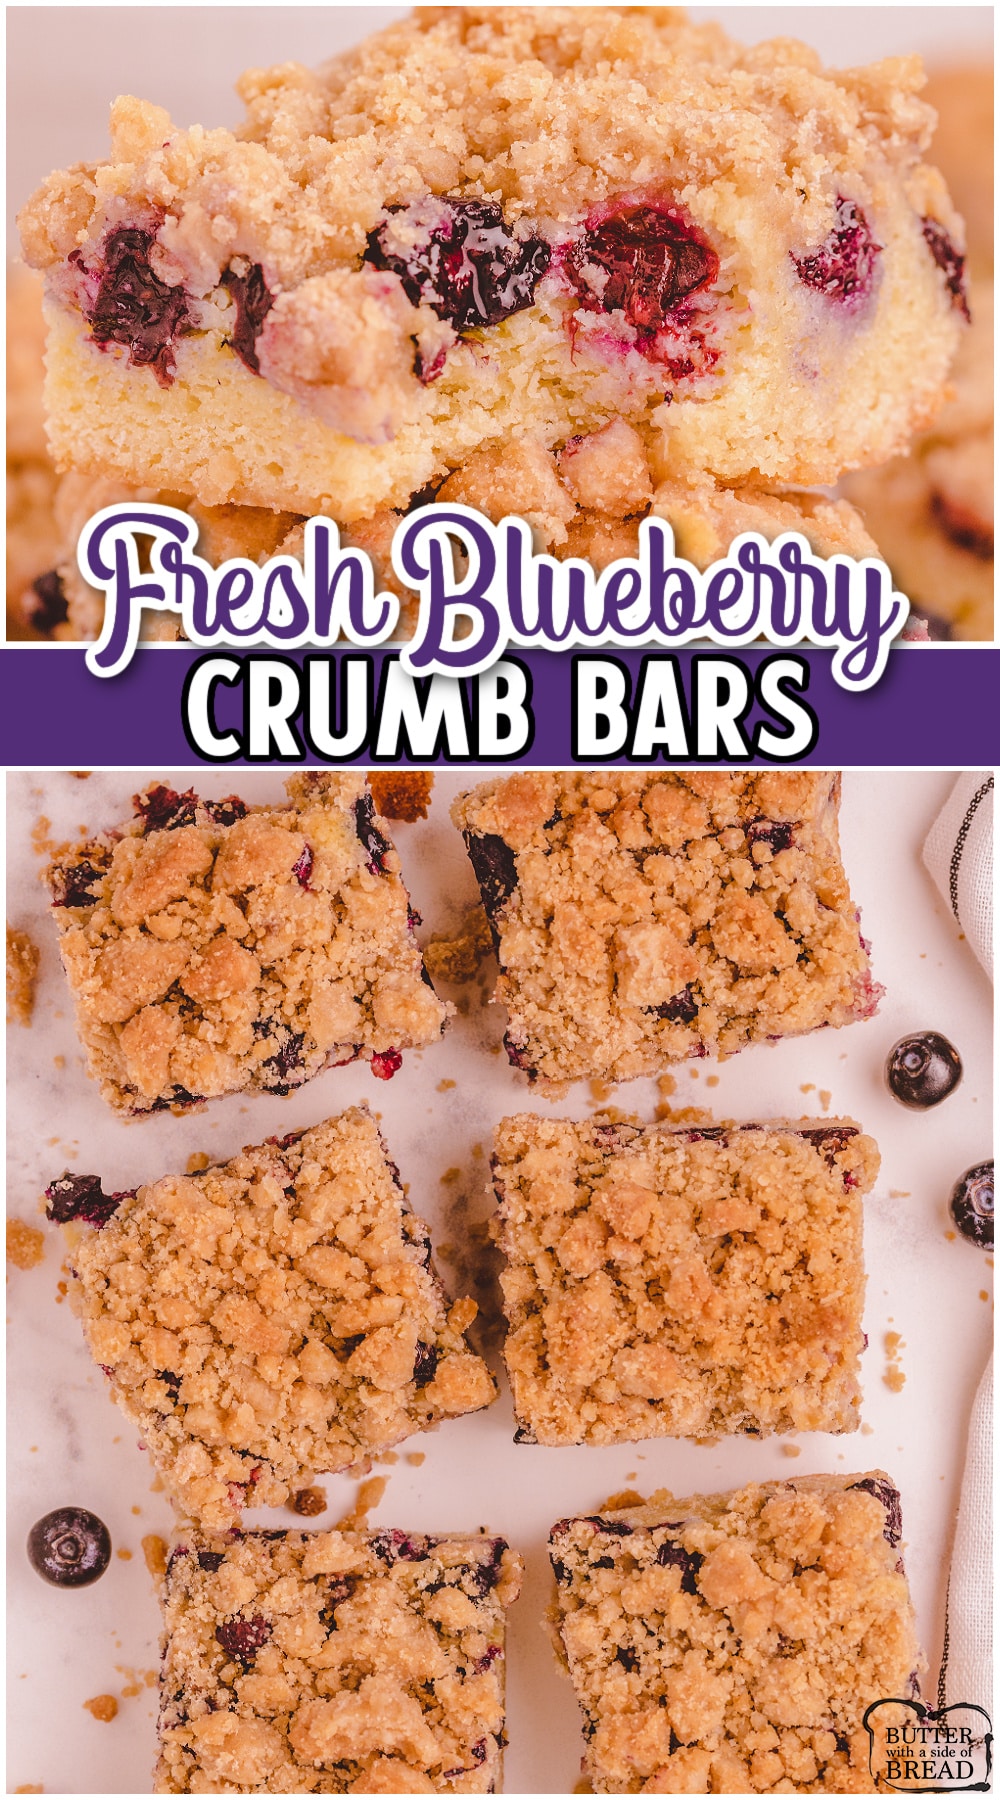 Blueberry Crumb Bars made with fresh blueberries & topped with a buttery streusel that tastes incredible! Blueberry Crumb Bar recipe that's easy to make & everyone loves!